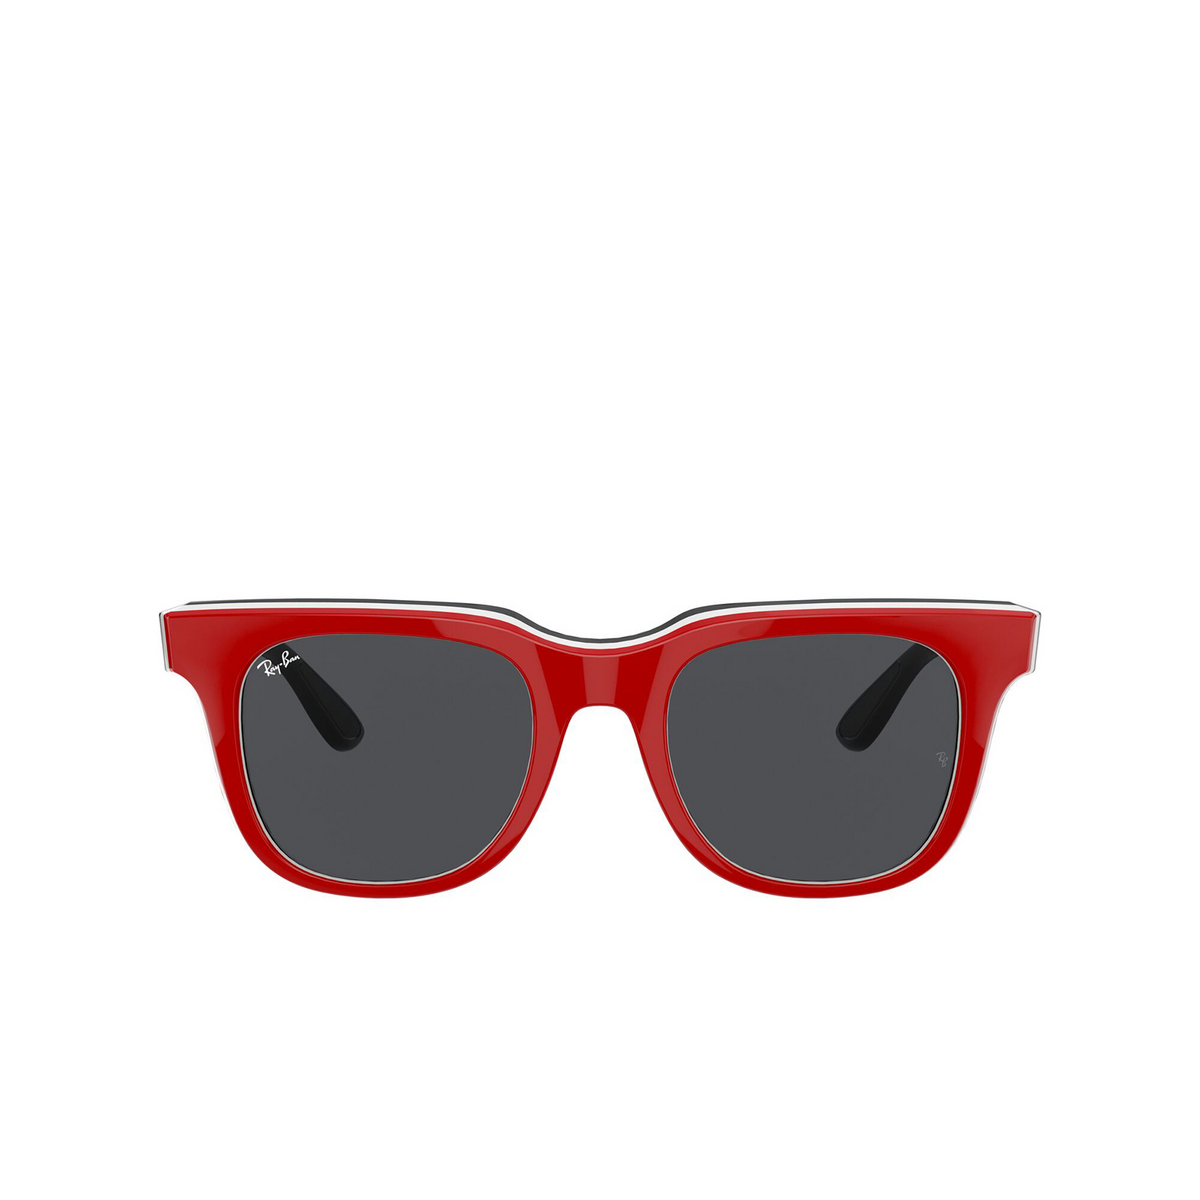 Ray-Ban RB4368 Sunglasses 652087 Red White Black - front view